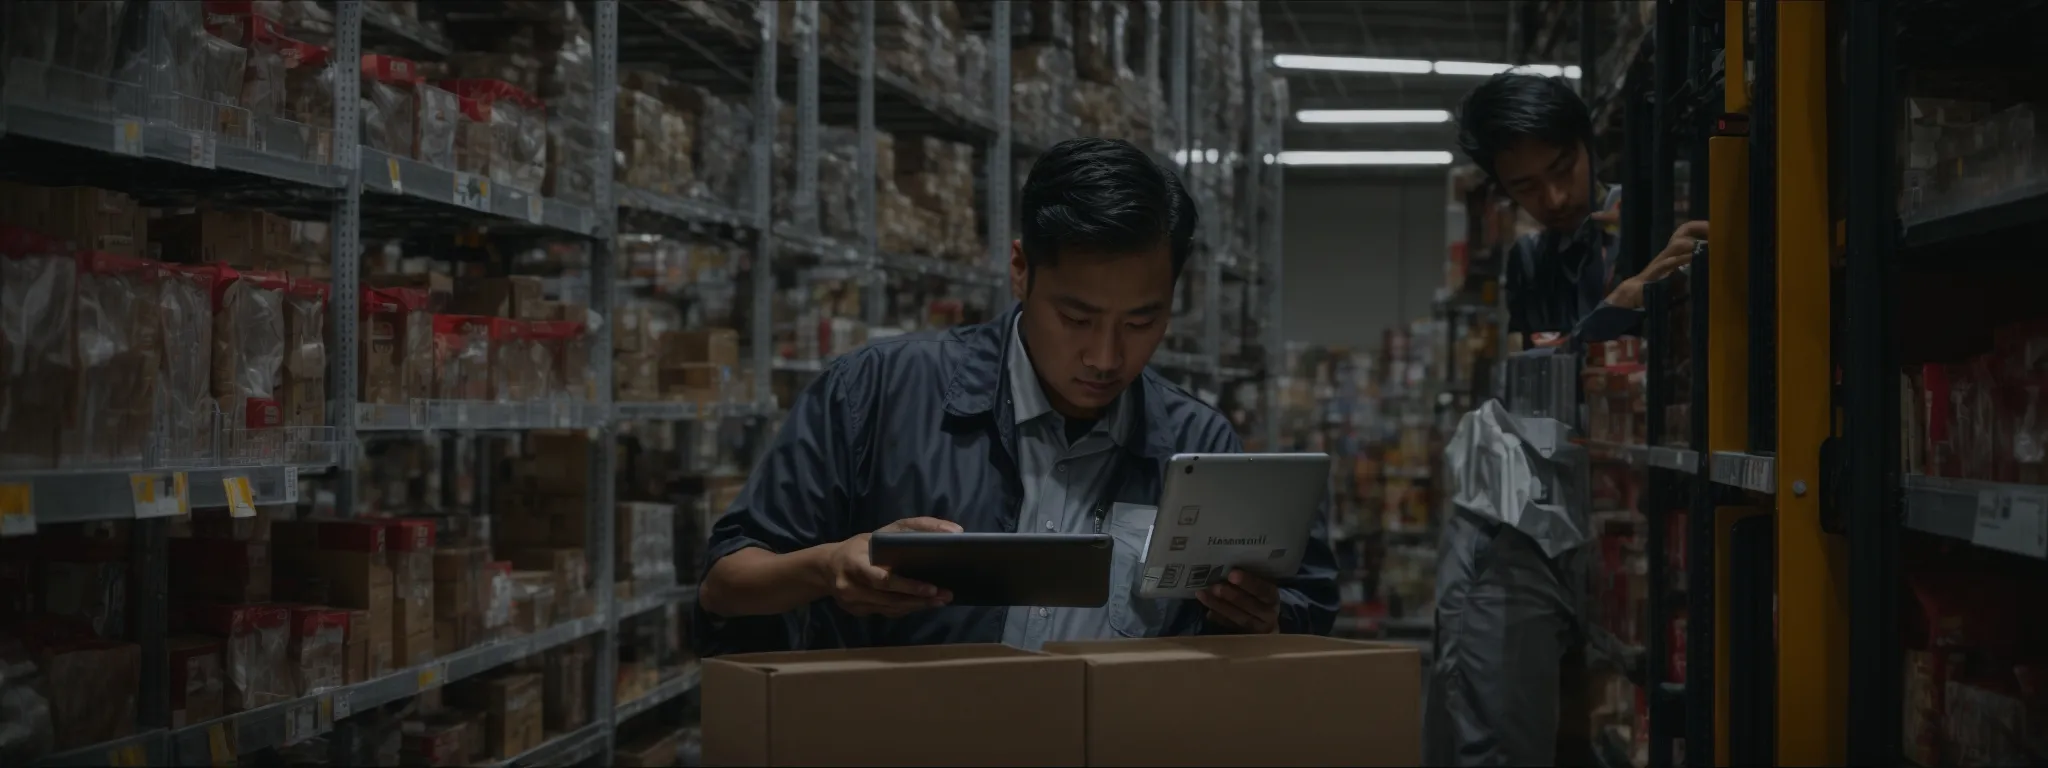 a warehouse manager examines a digital tablet while standing next to tall shelves stocked with organized goods.